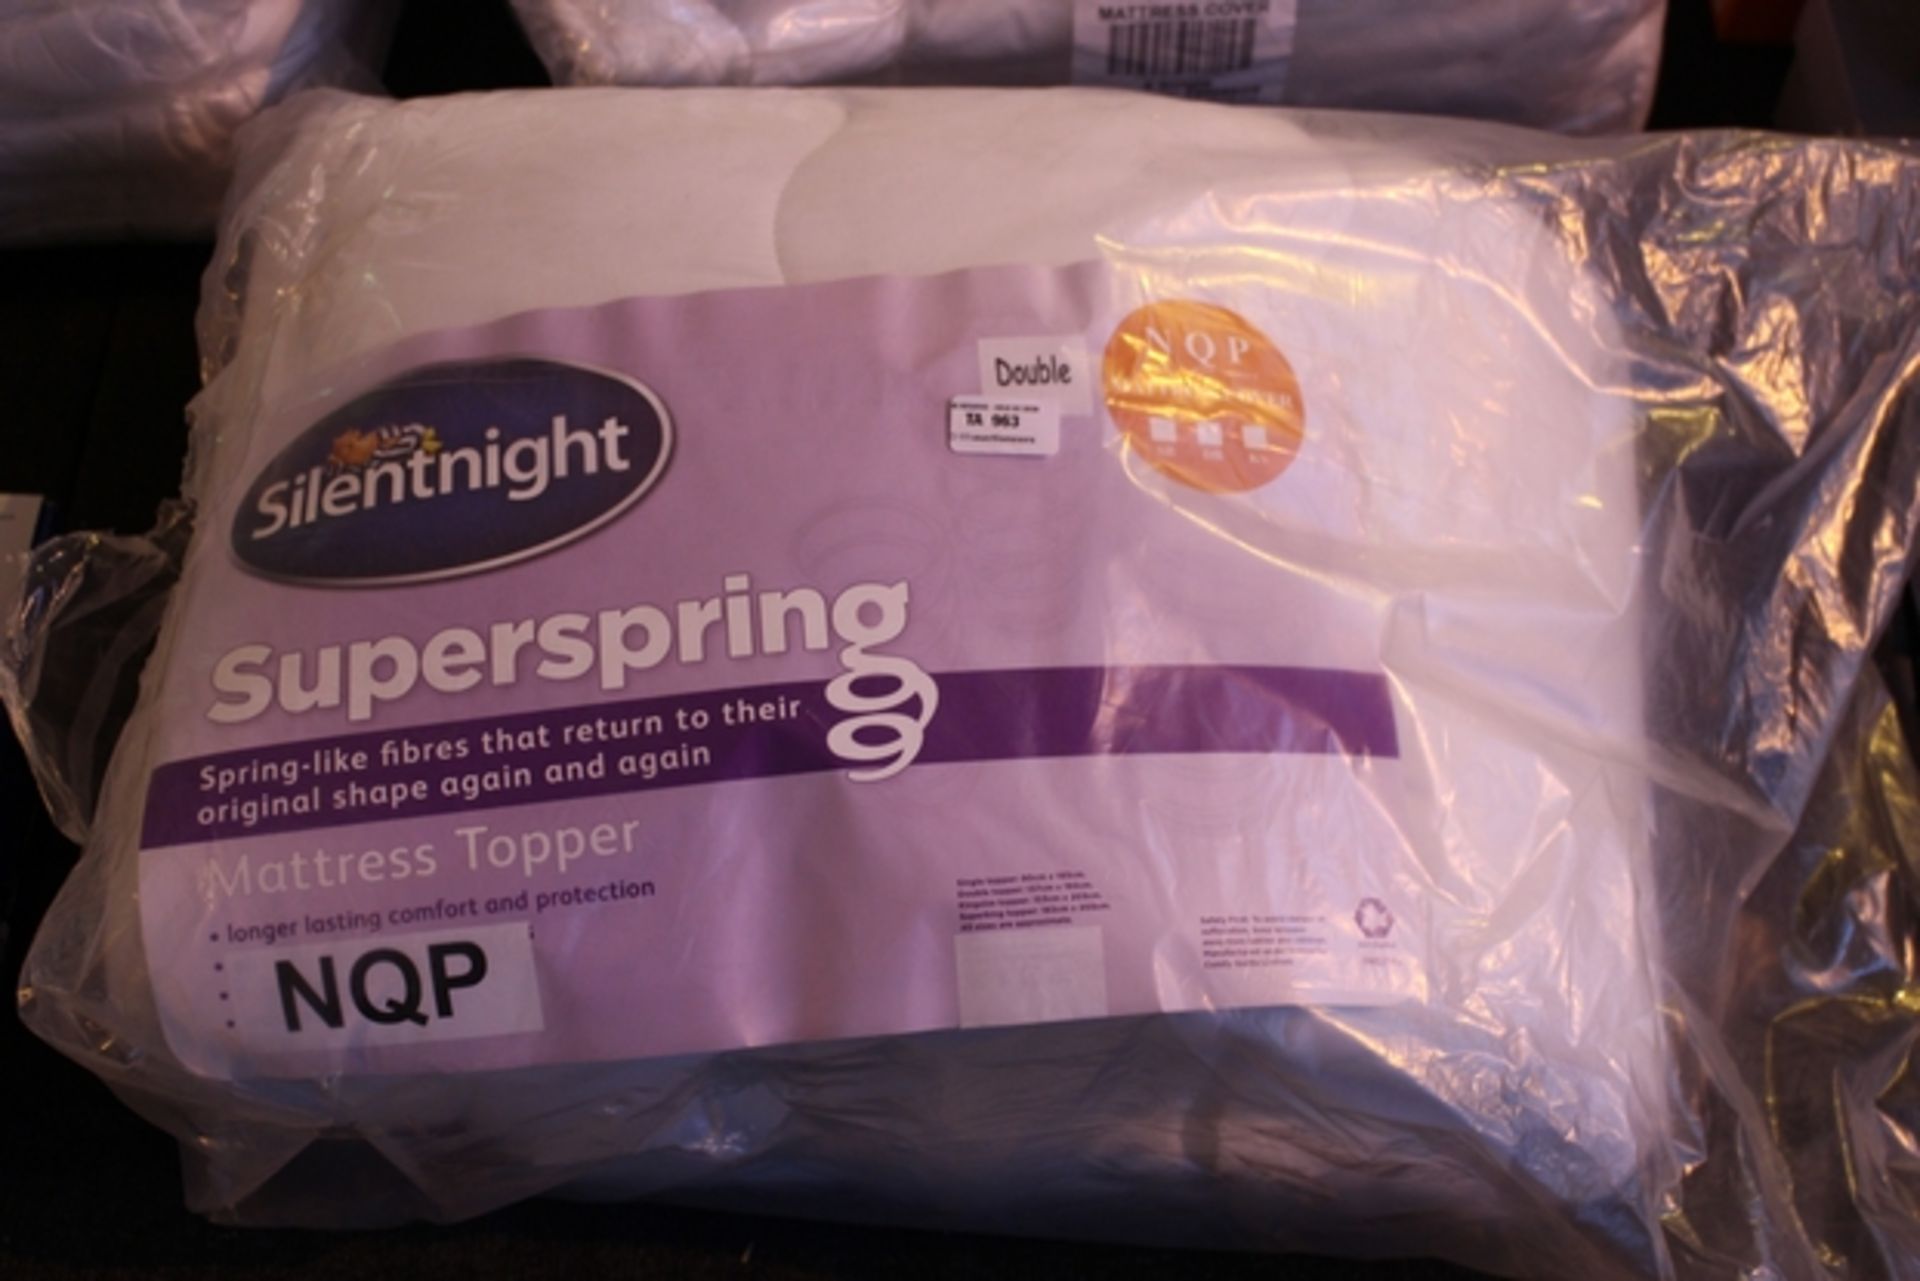 1X BAGGED UNUSED SILENT NIGHT SUPER SPRING DOUBLE MATTRESS TOPPER (DS-NP)